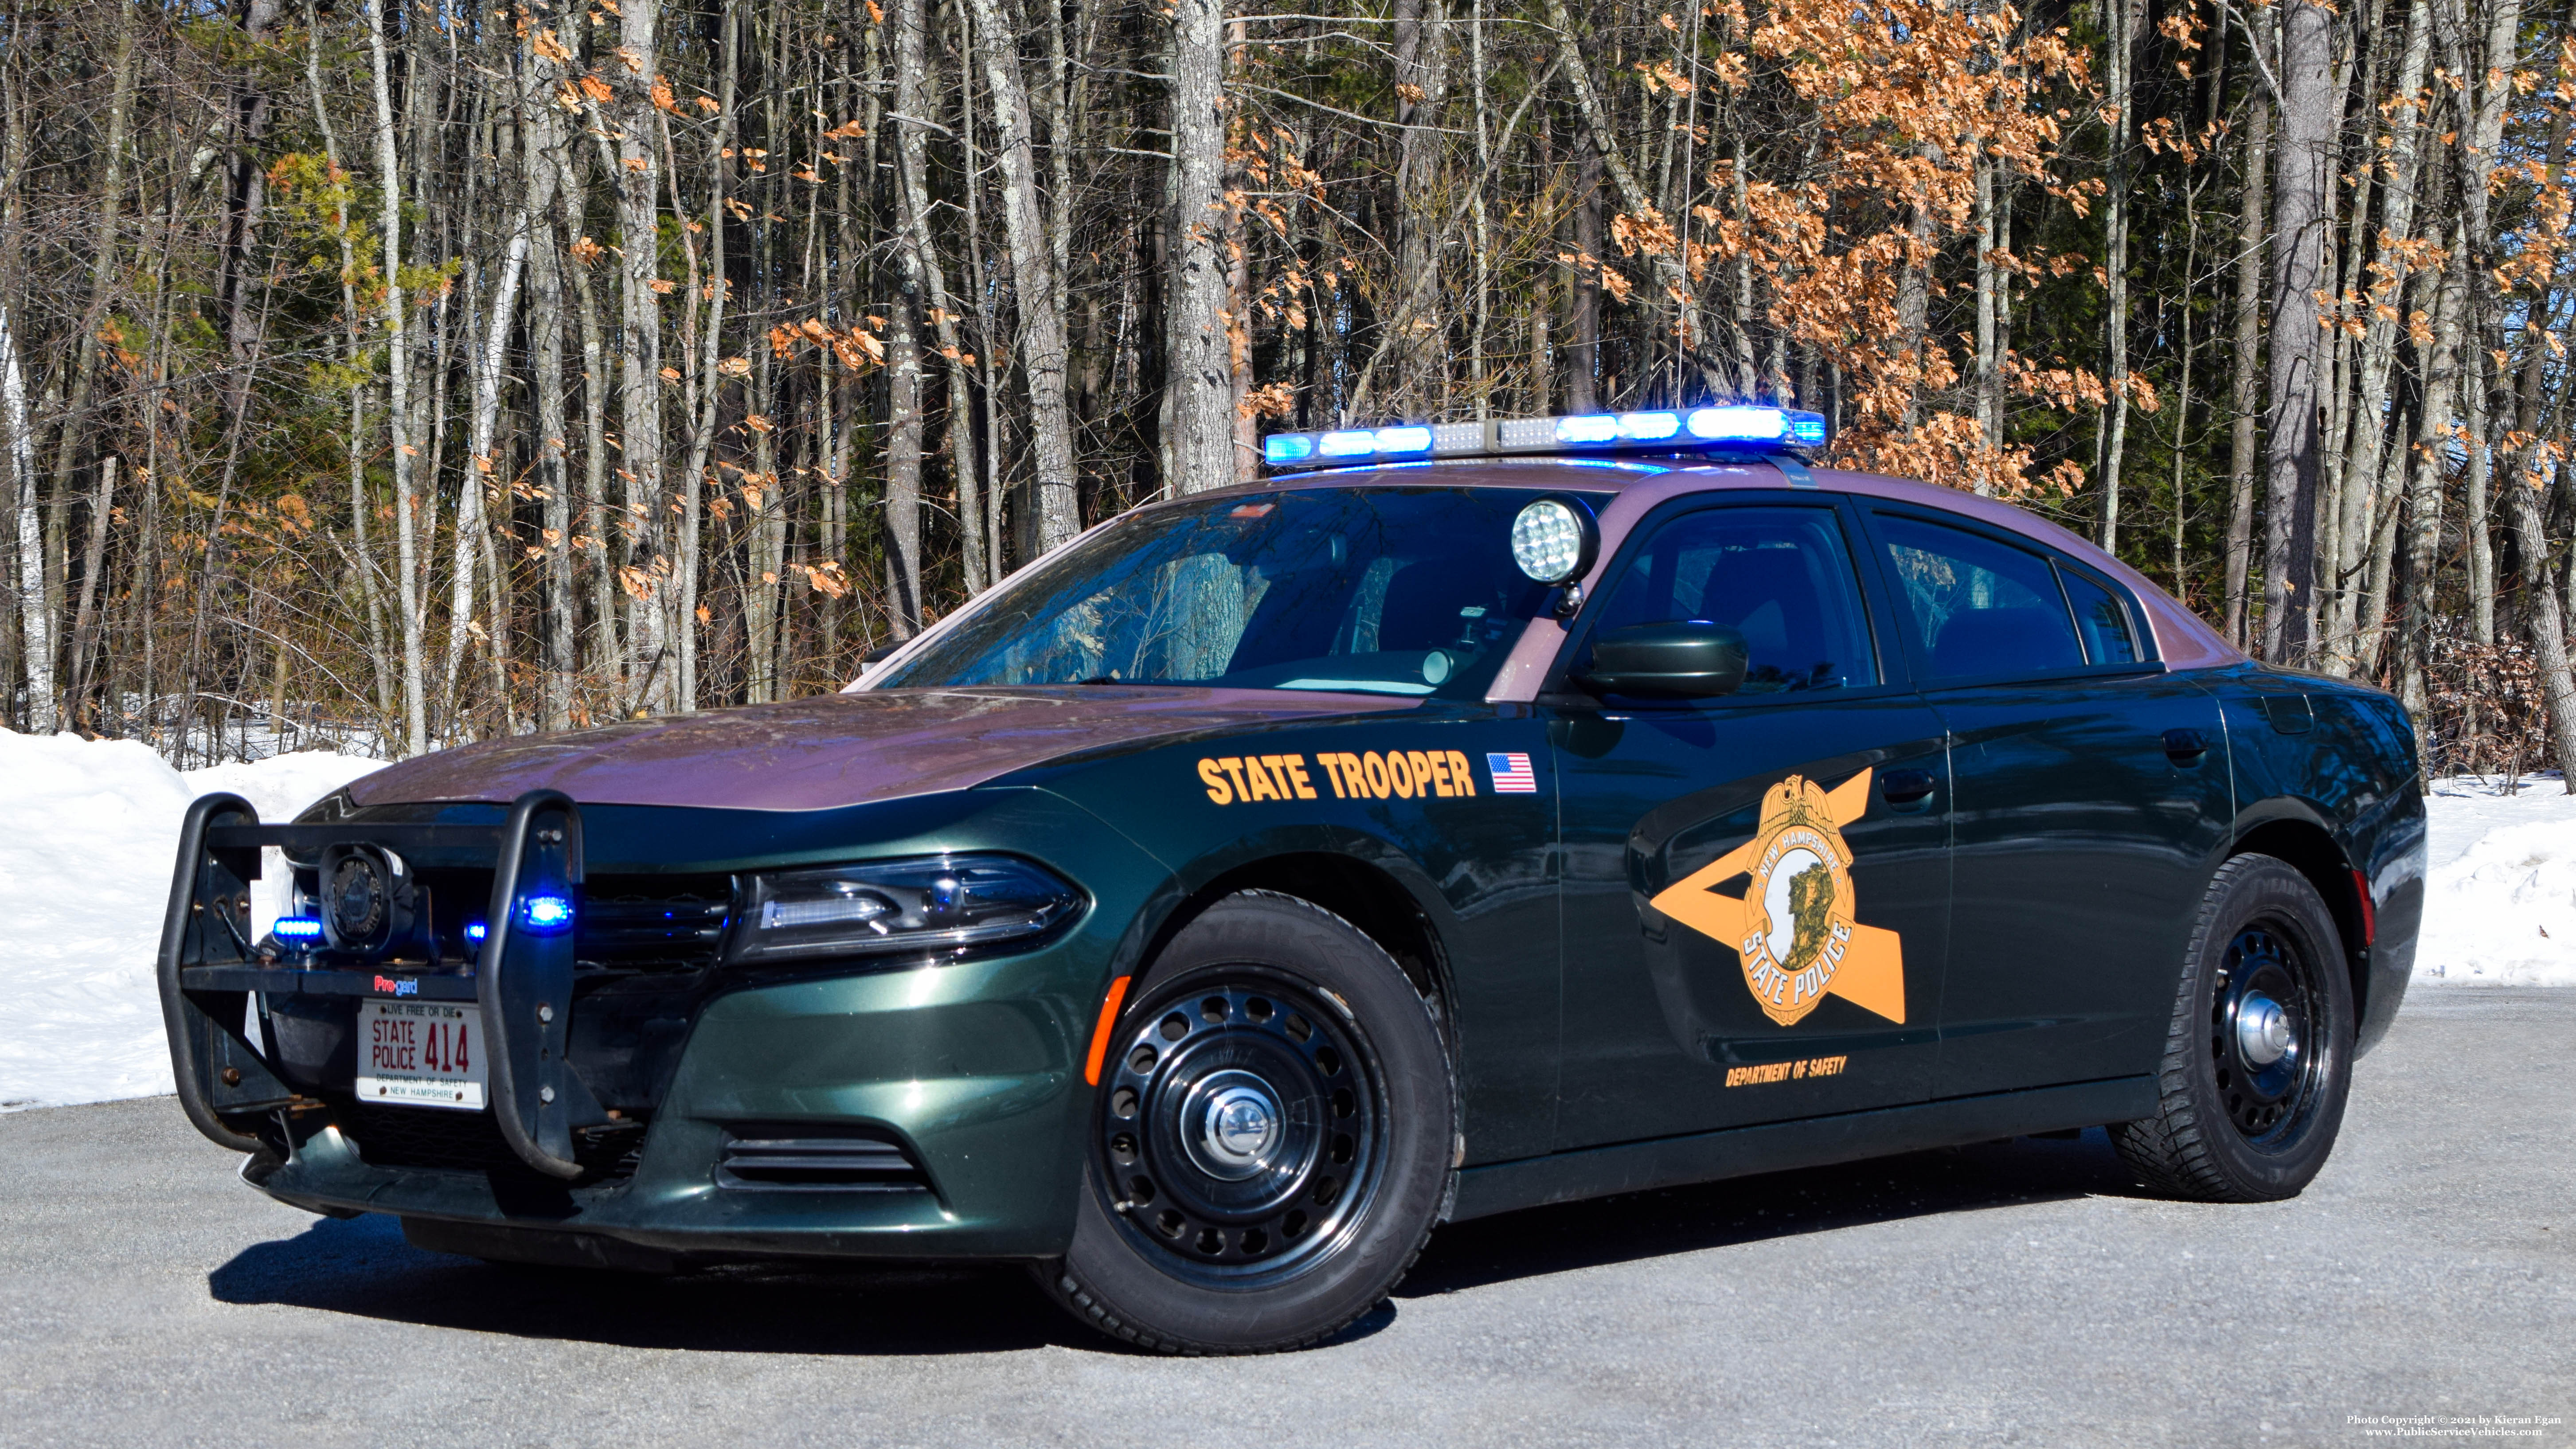 A photo  of New Hampshire State Police
            Cruiser 414, a 2015 Dodge Charger             taken by Kieran Egan